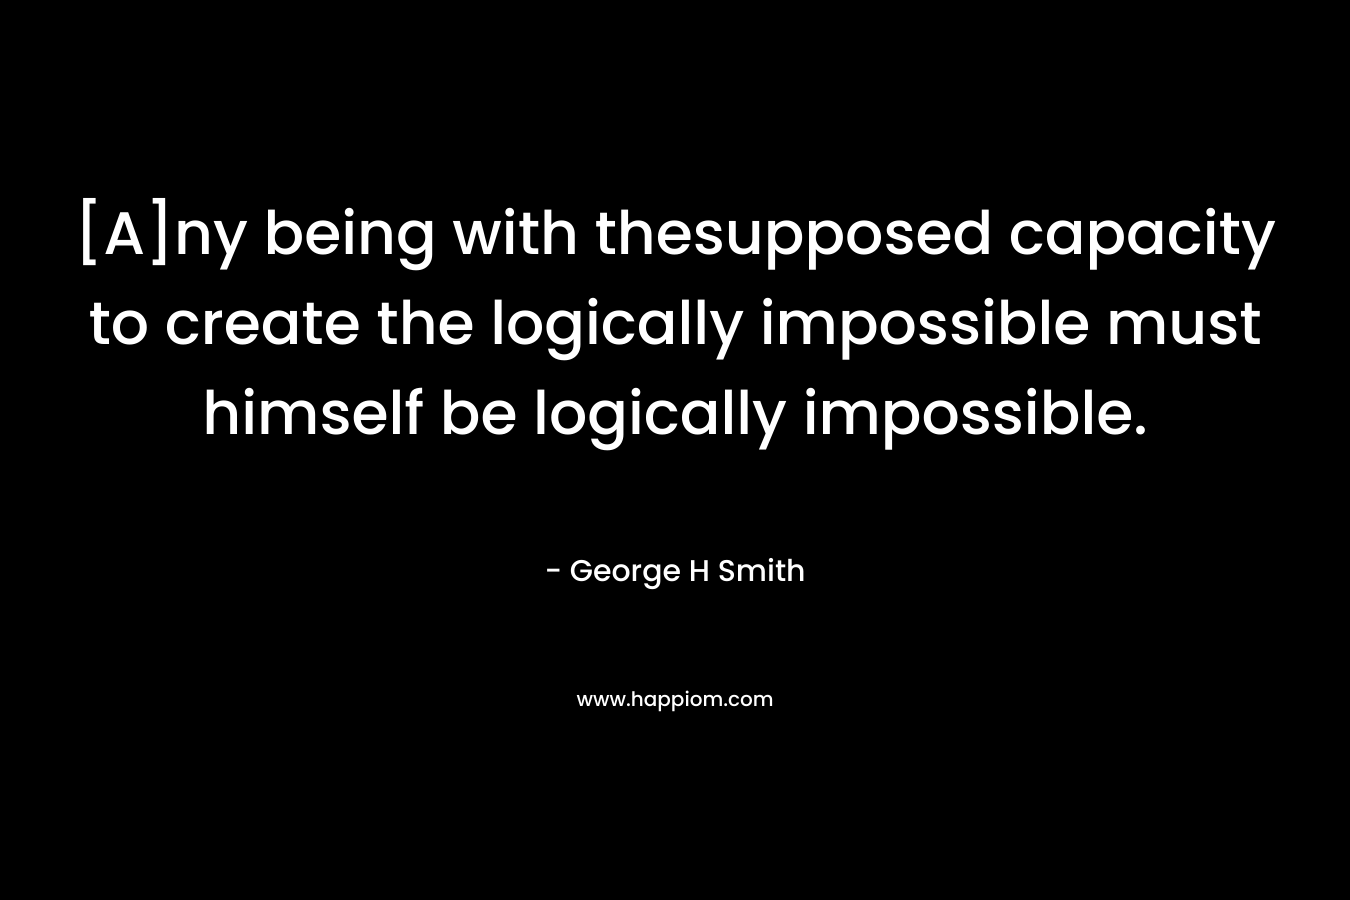 [A]ny being with thesupposed capacity to create the logically impossible must himself be logically impossible. – George H Smith